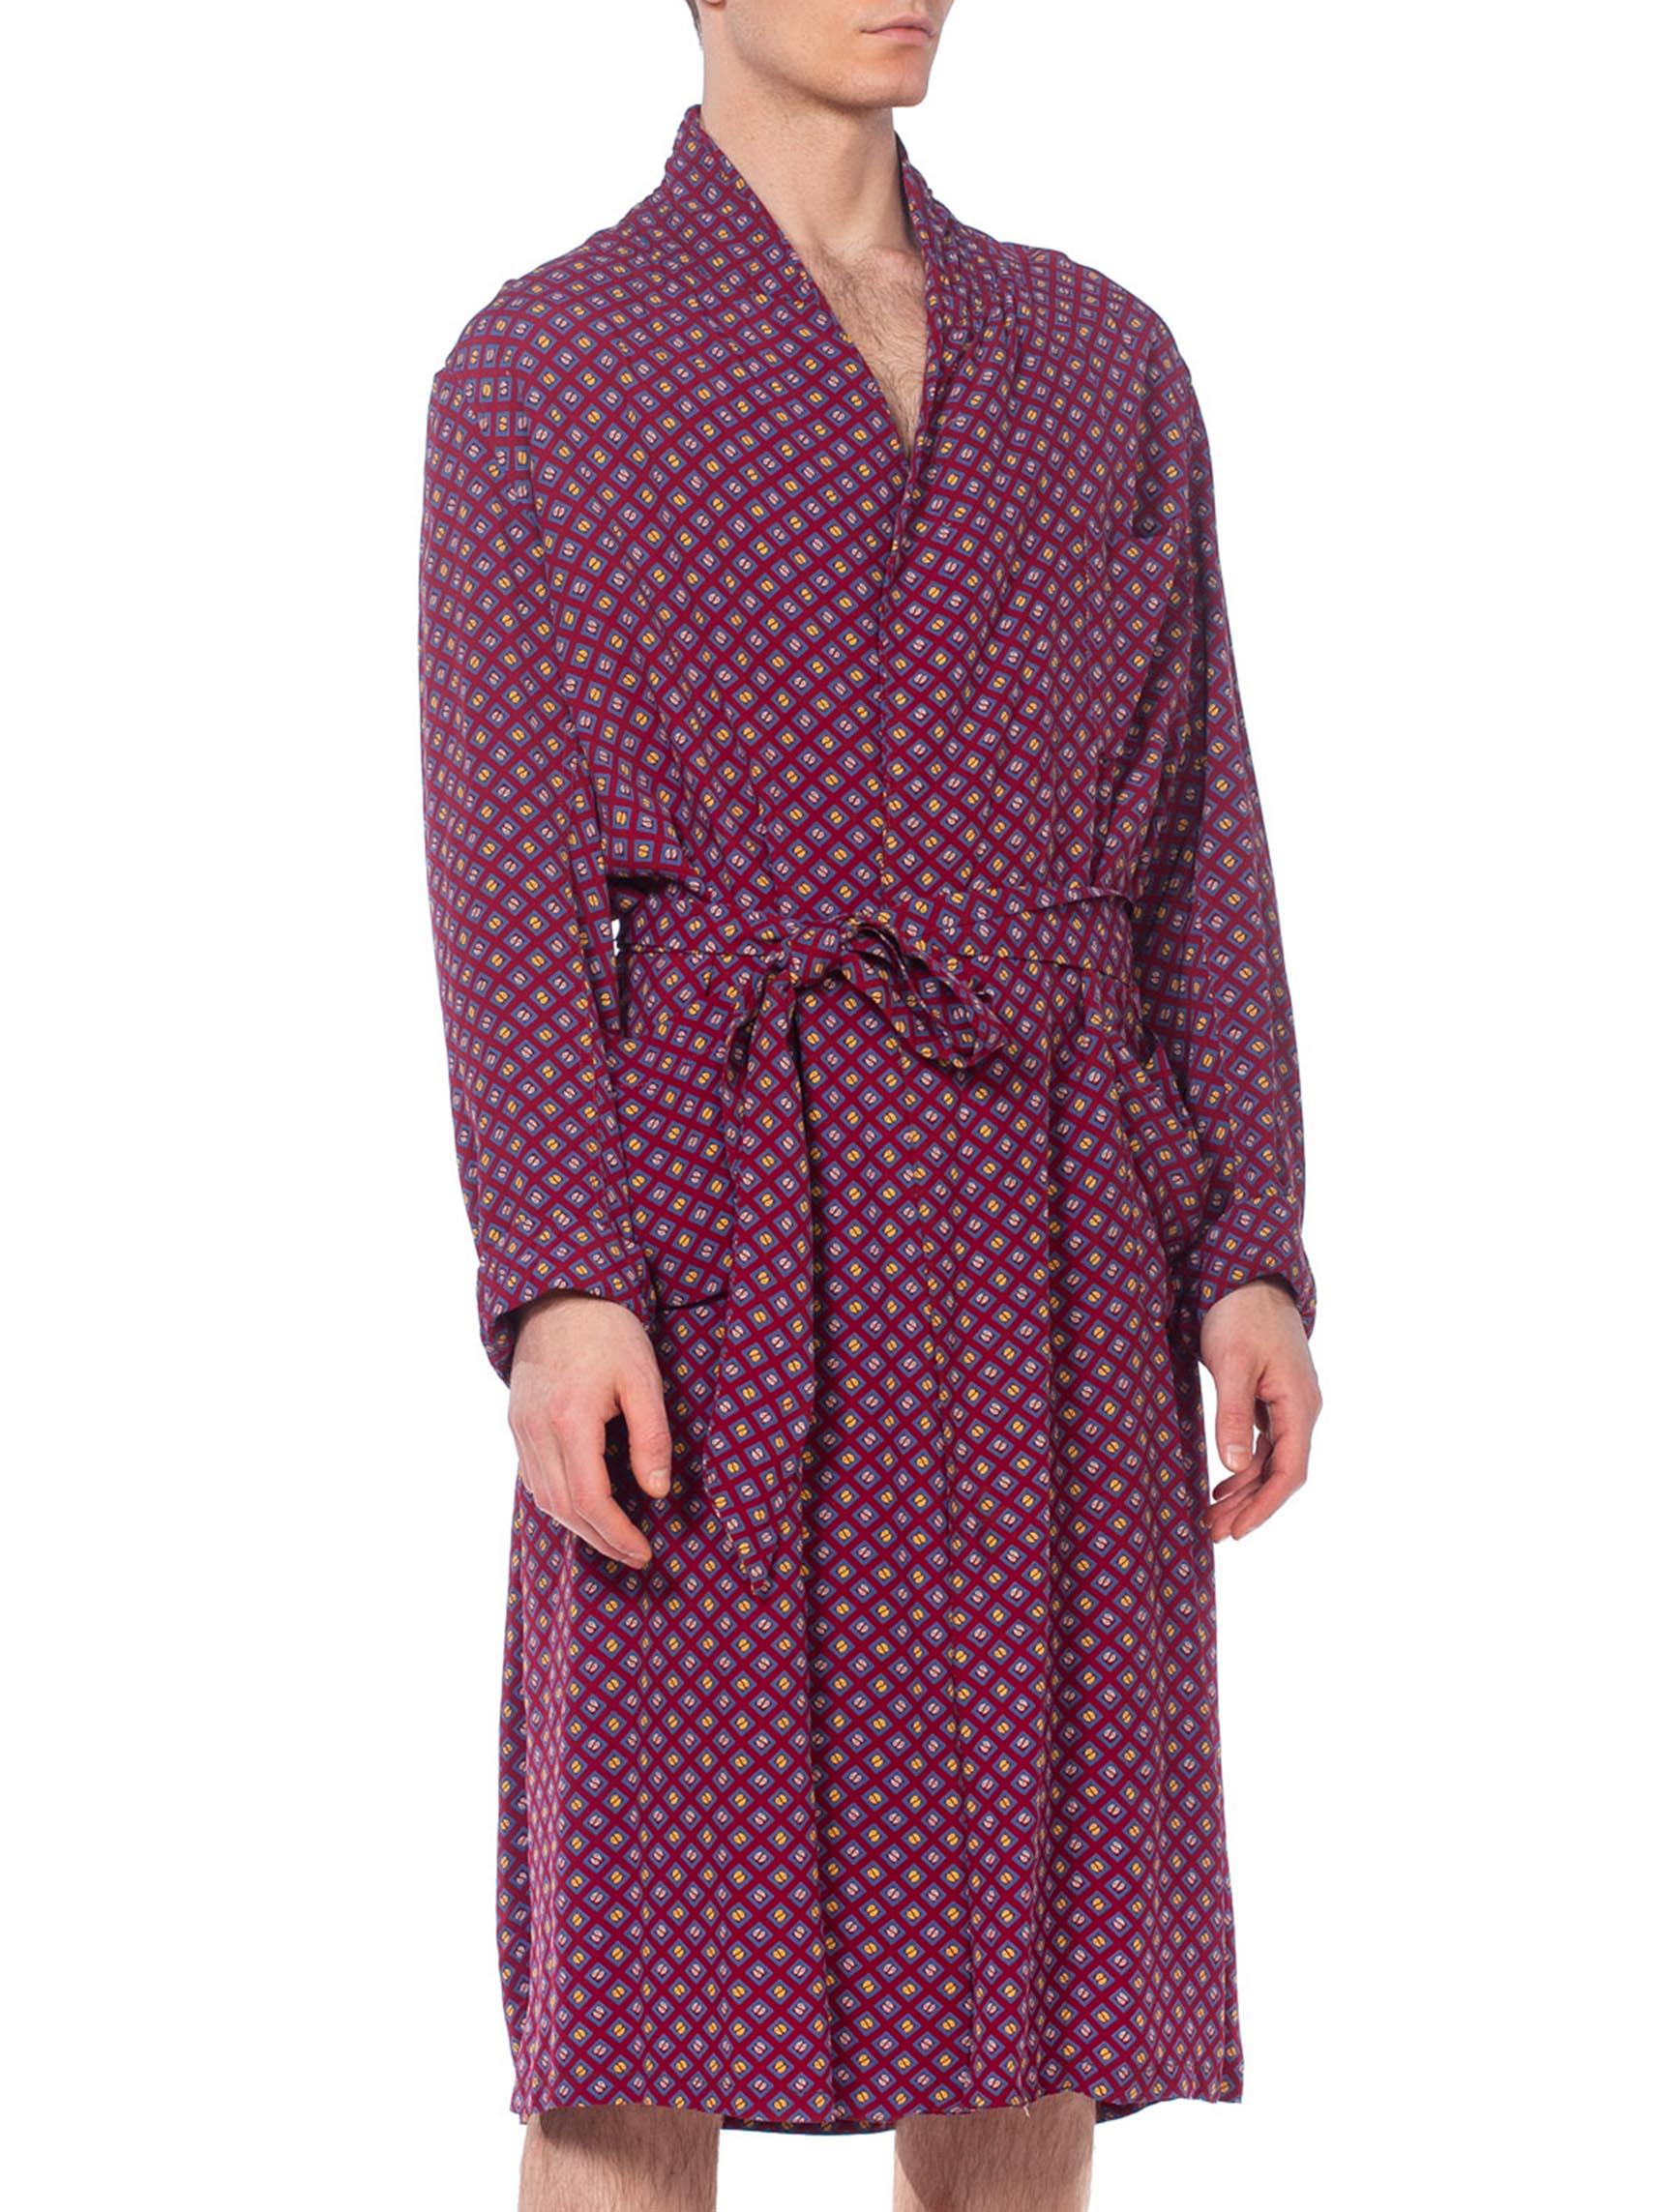 1940s mens dressing gown